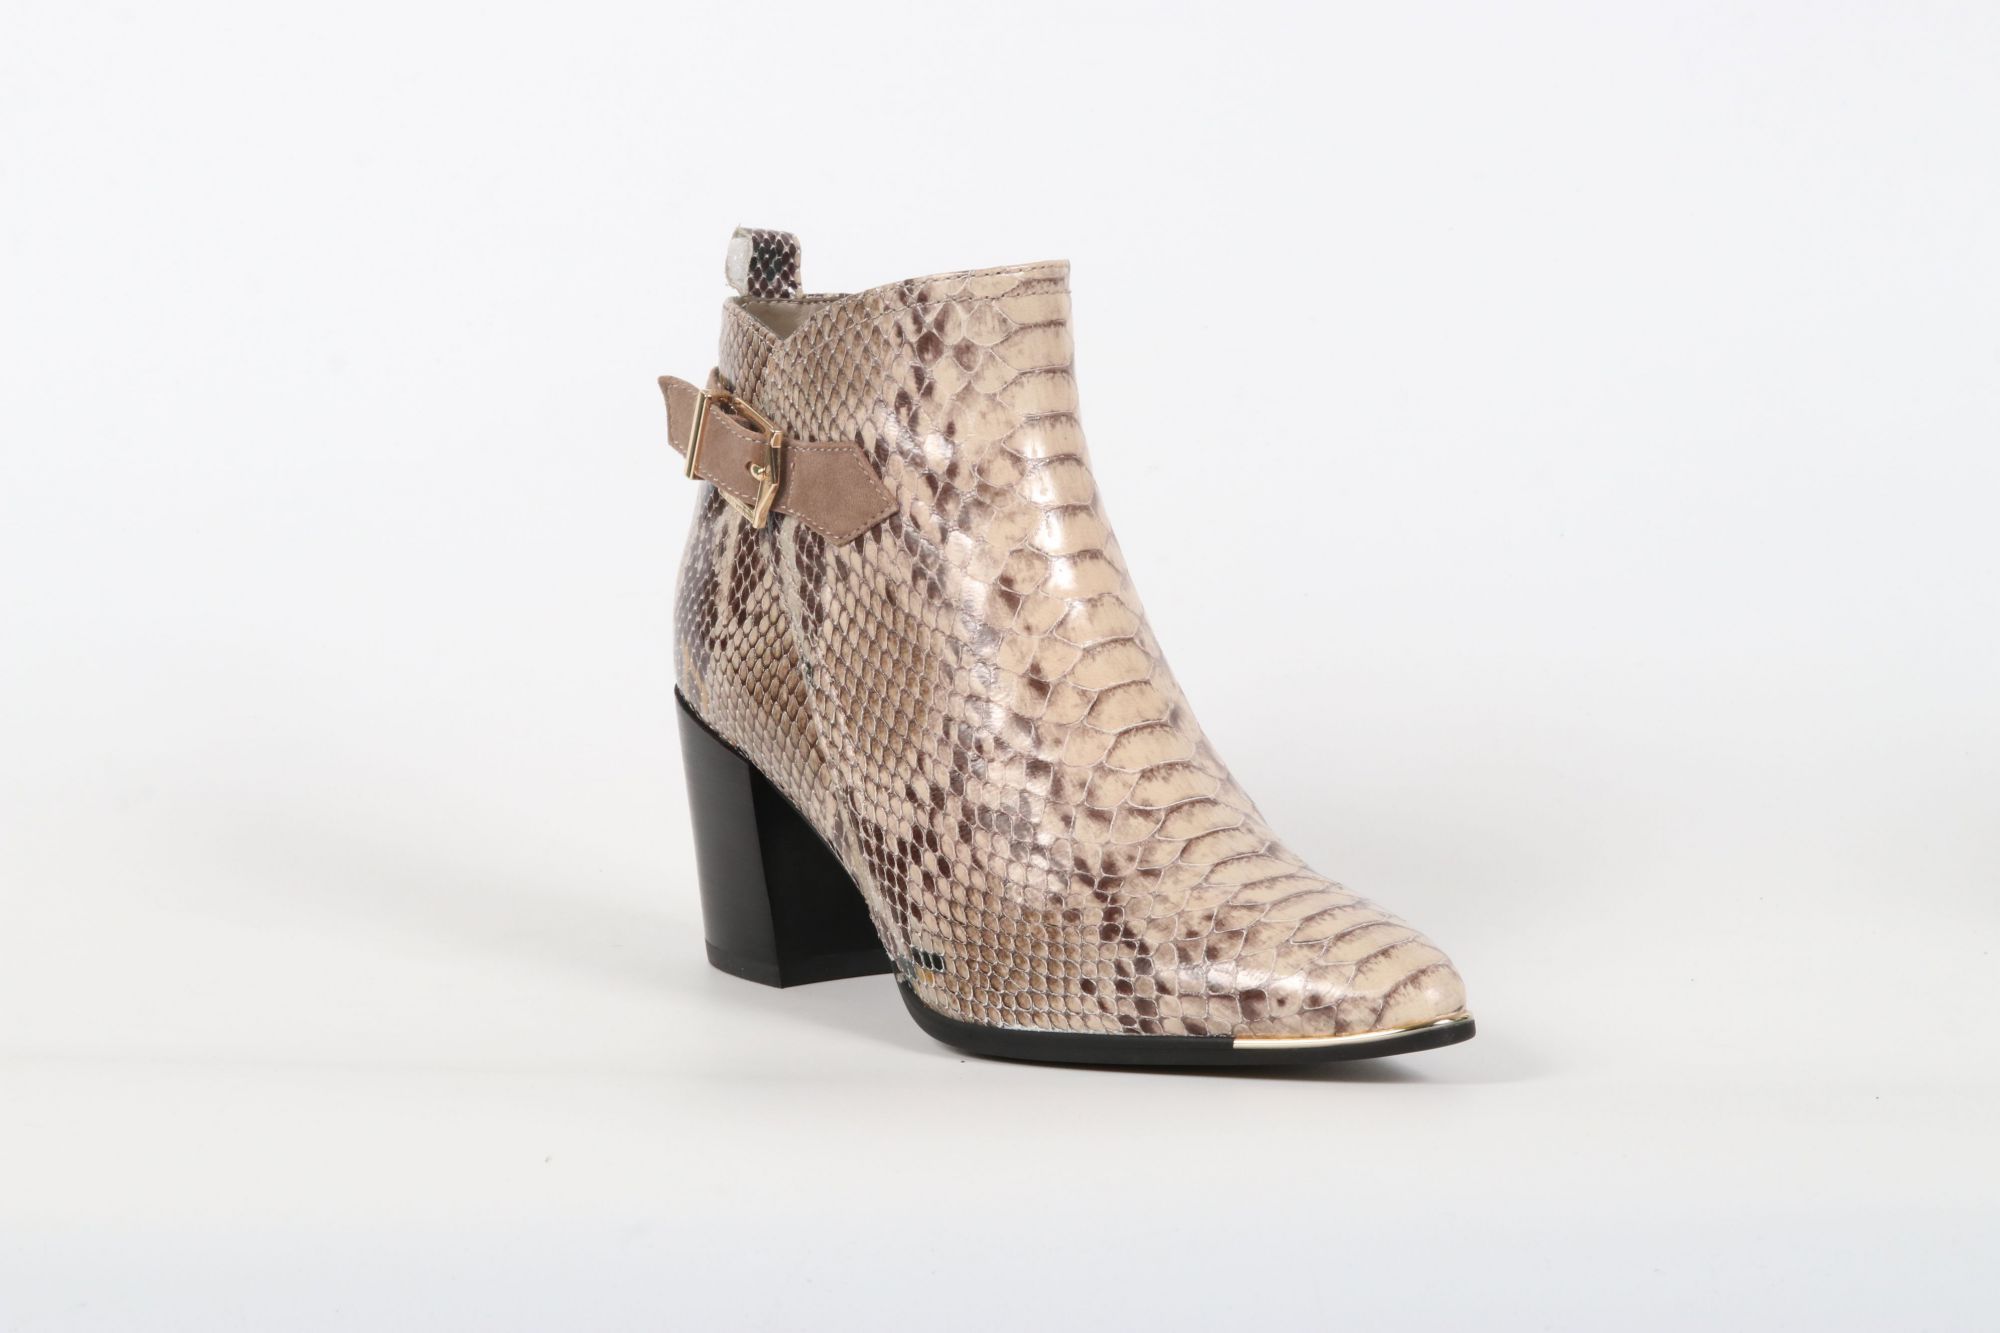 Korean Conceited itself Bottines Femme Fugitive Guly Python Taupe Chèvre Velours Taupe